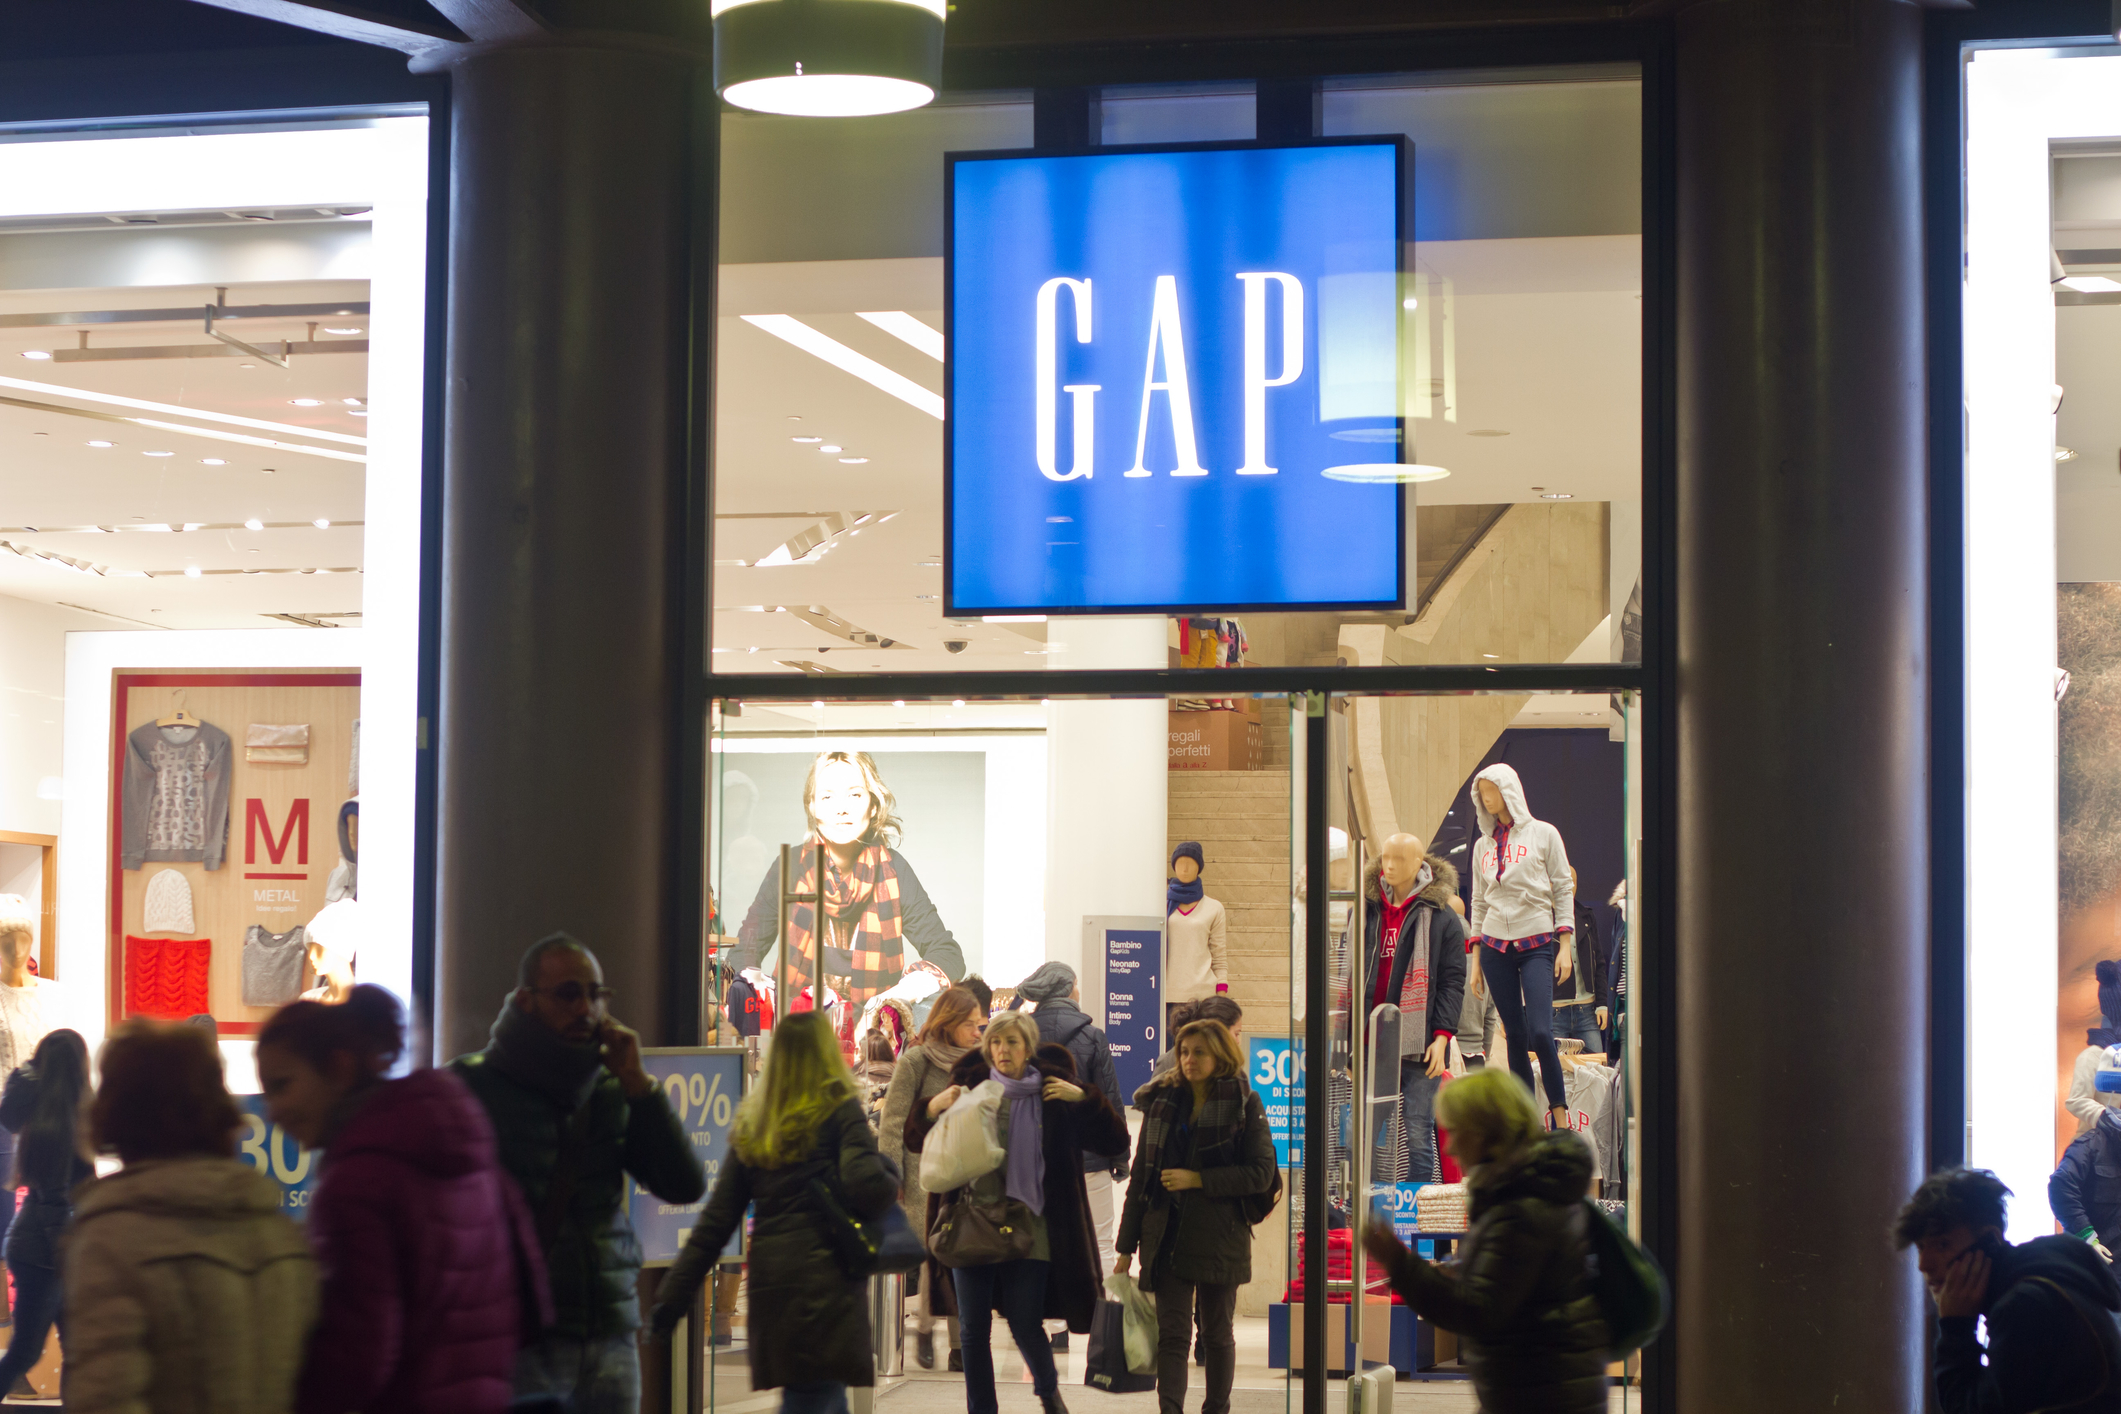 Save 51% at GAP today, plus a $100 order nets free Christmas delivery!